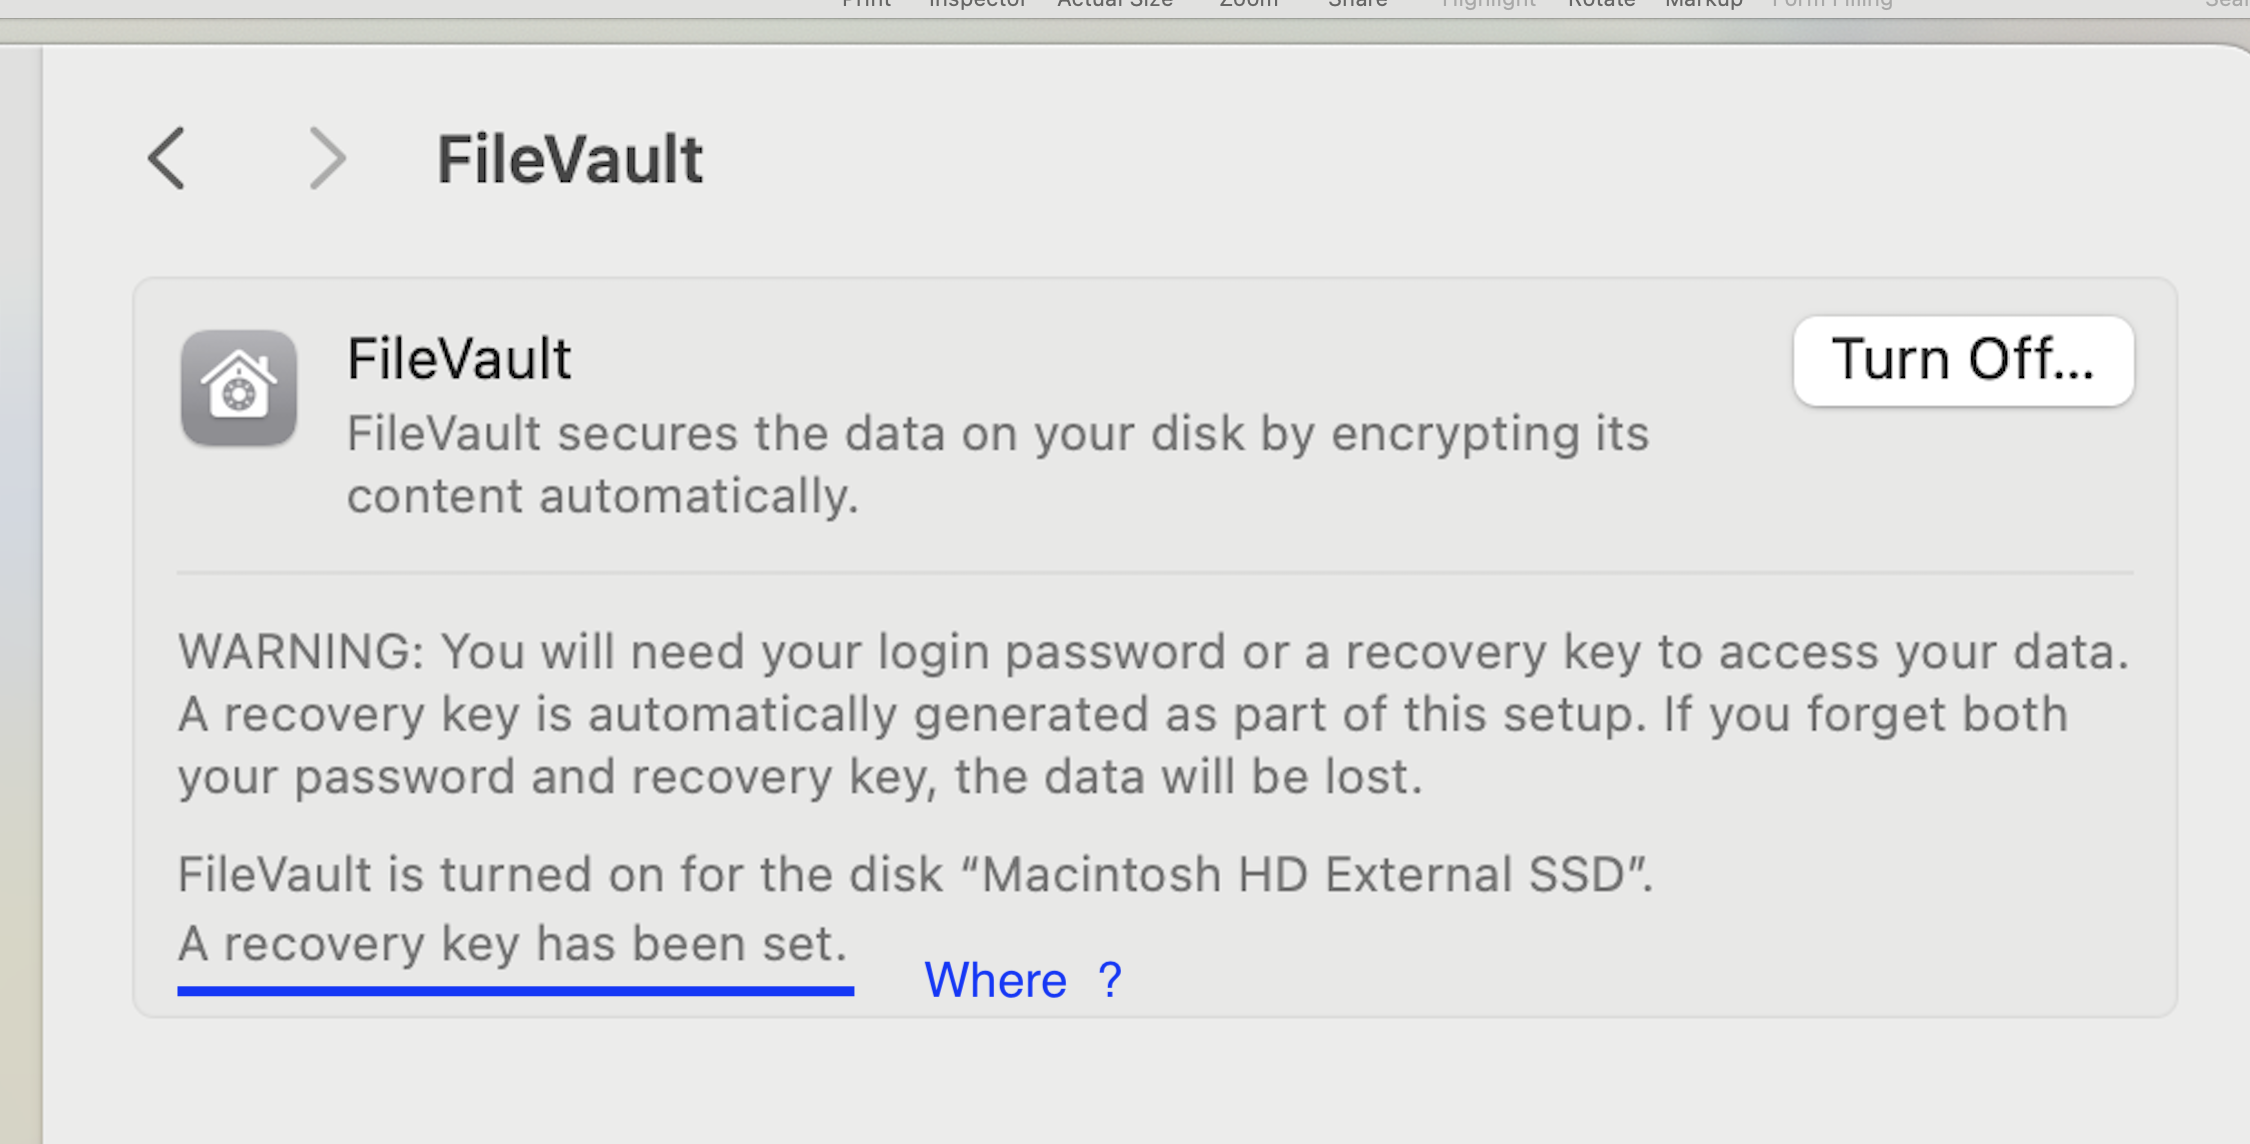 FileVault bug: A recovery key has been set by your company